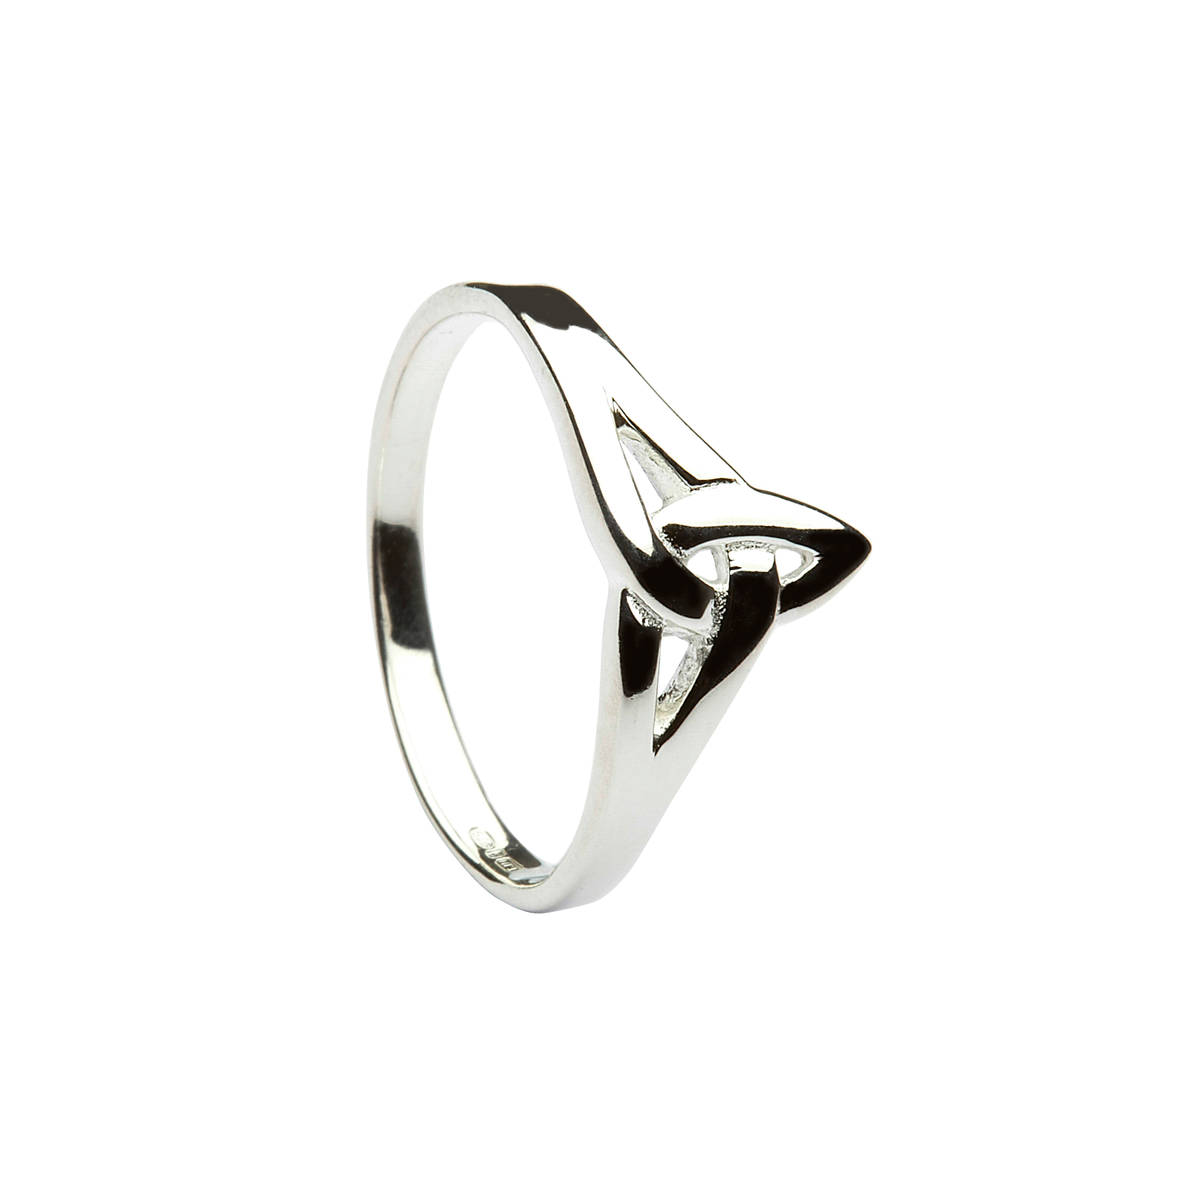 Silver classic trinity knot 'down the finger' ring